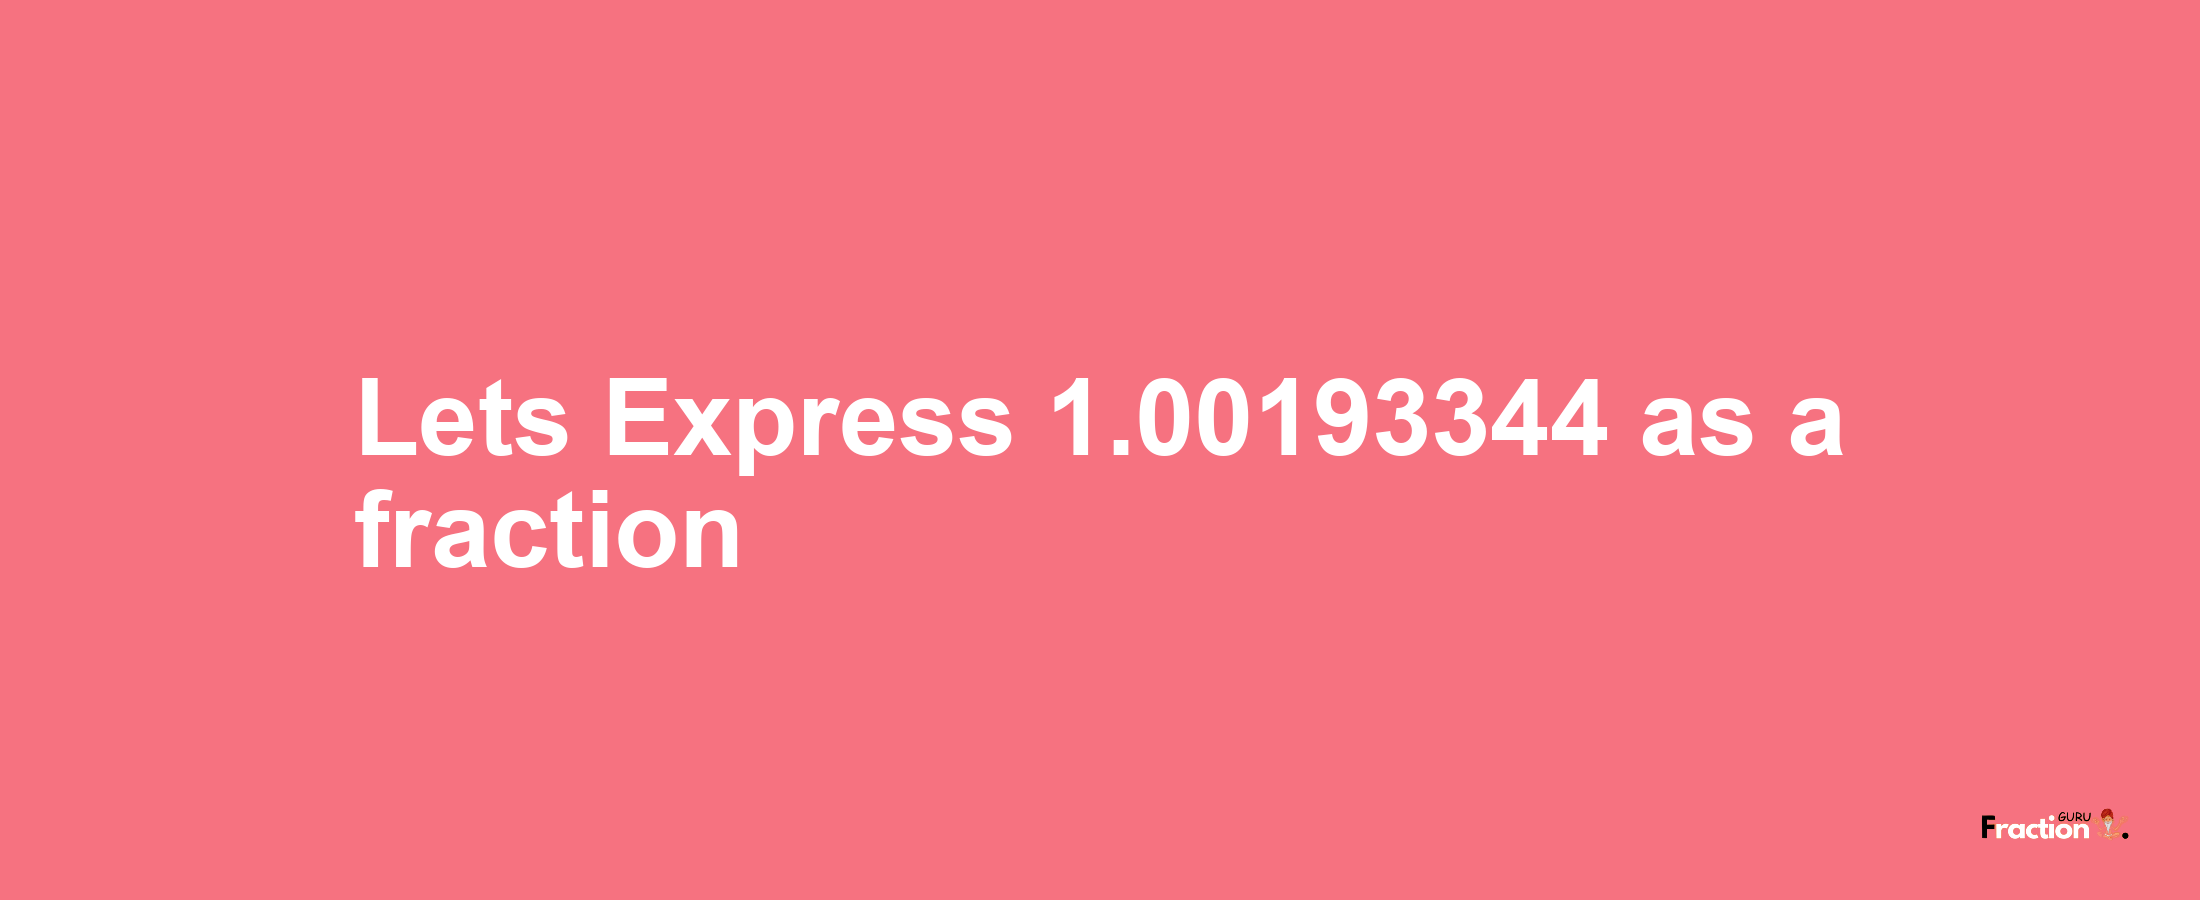 Lets Express 1.00193344 as afraction